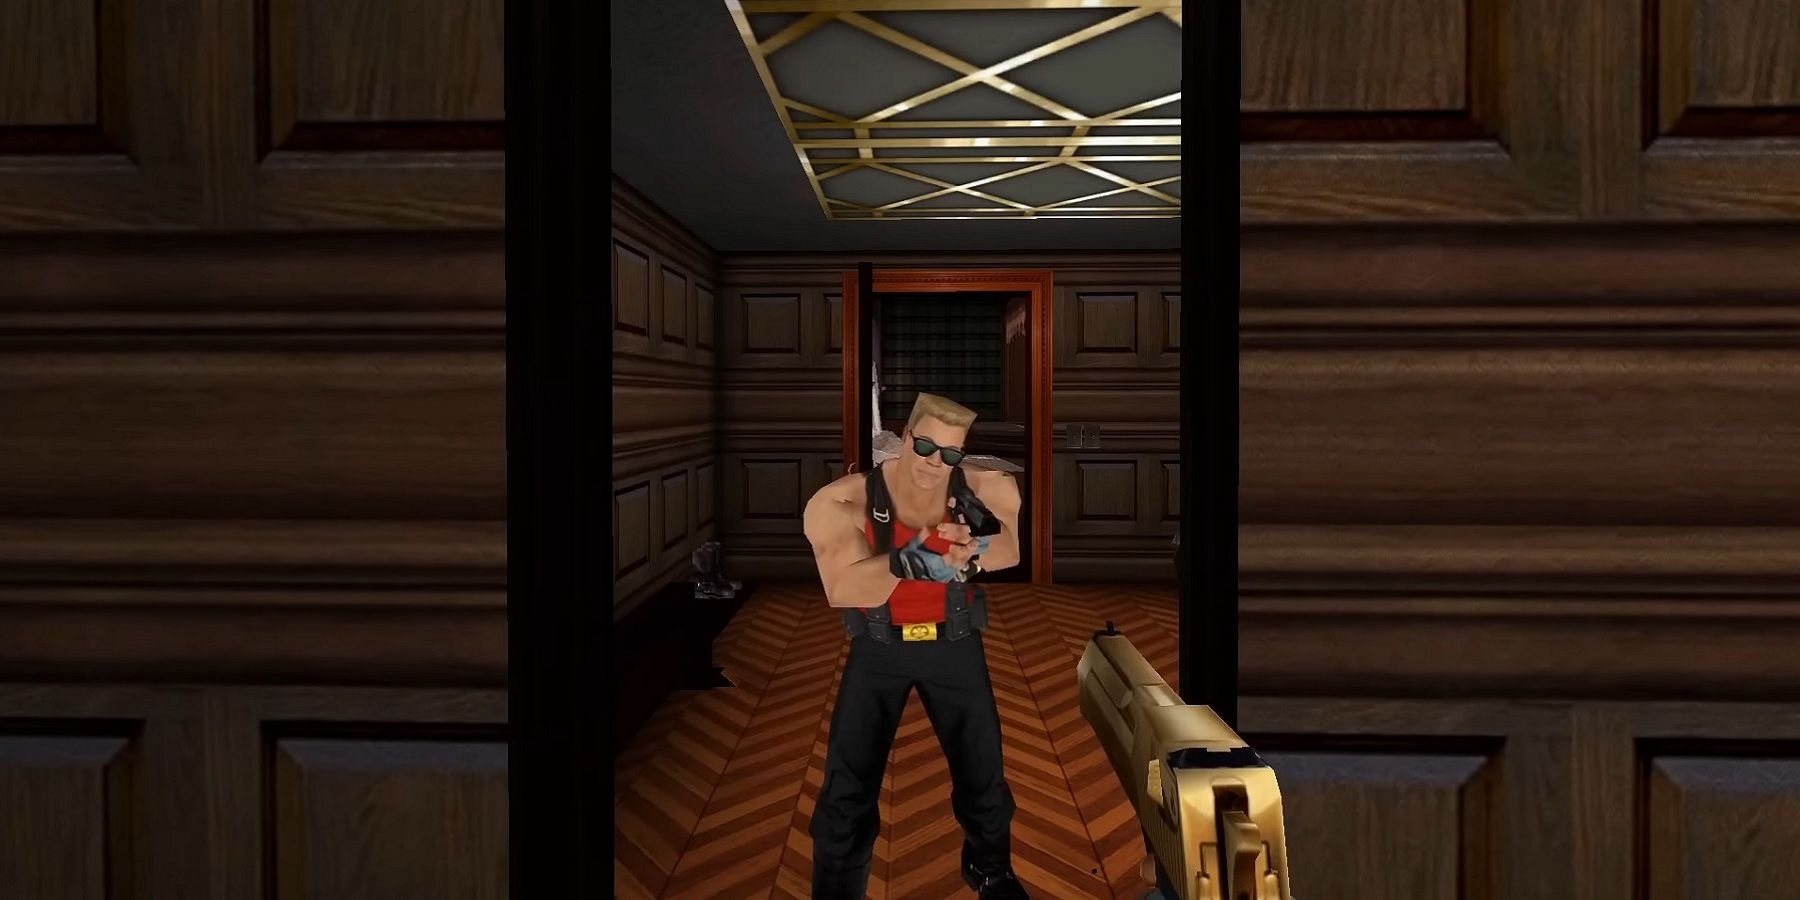 Image from the Duke Nukem Forever Restorartion Project showing Duke himself posing in front of a mirror.